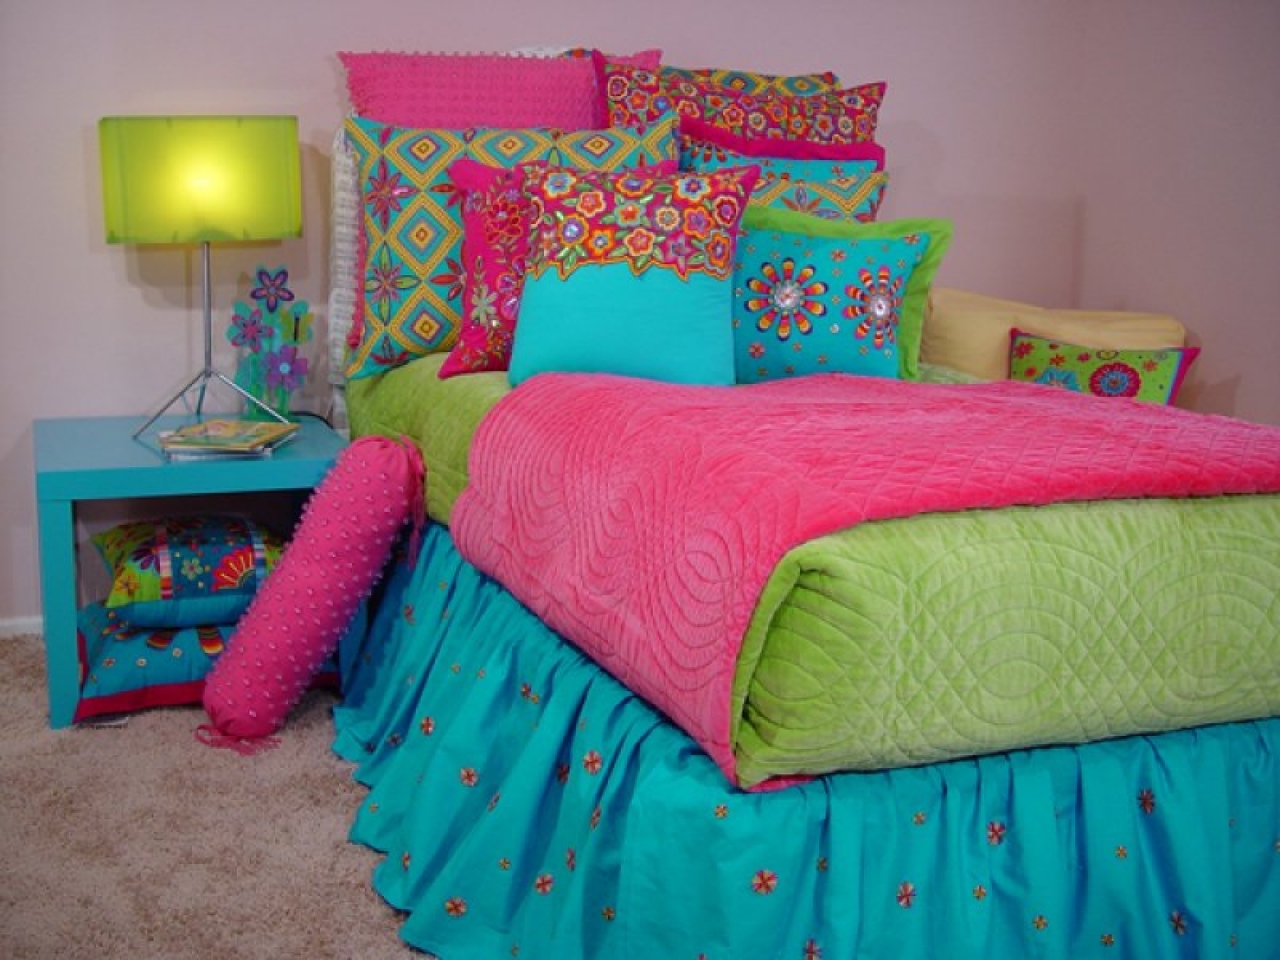 Bright colored quilts